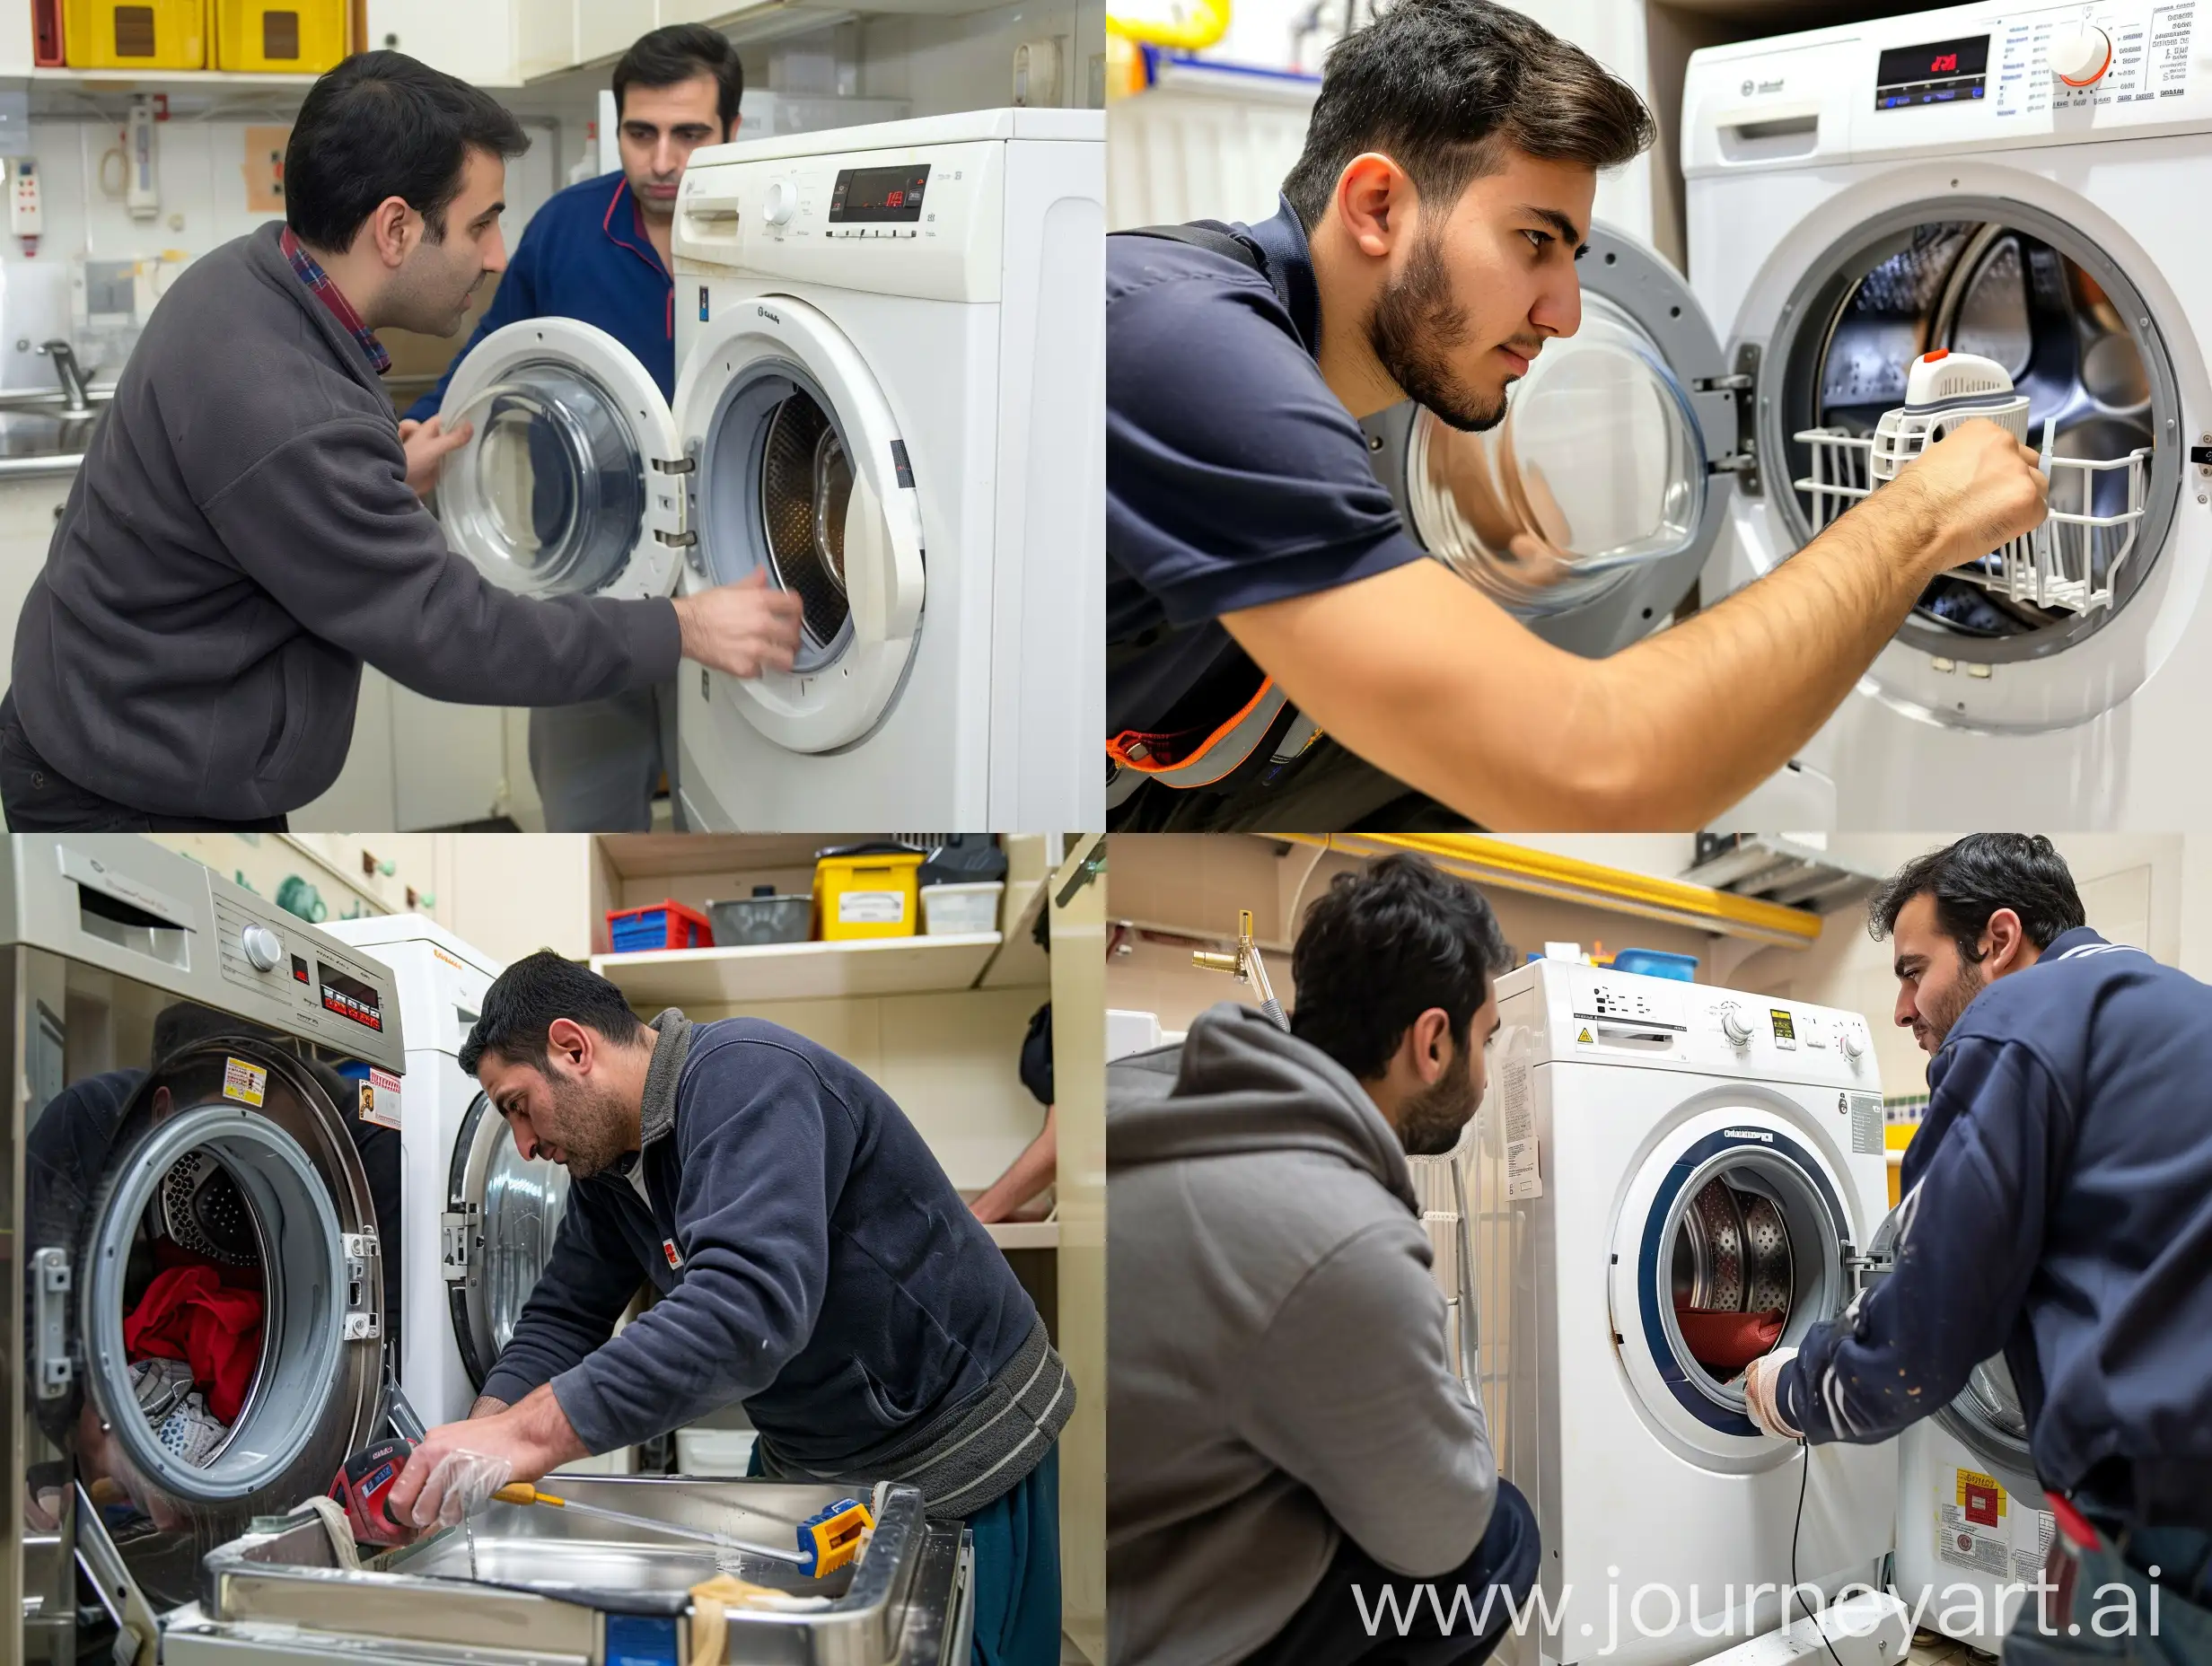 Special home repair course in Tehran, where students are engaged in training in washing machine and dishwasher repairs.